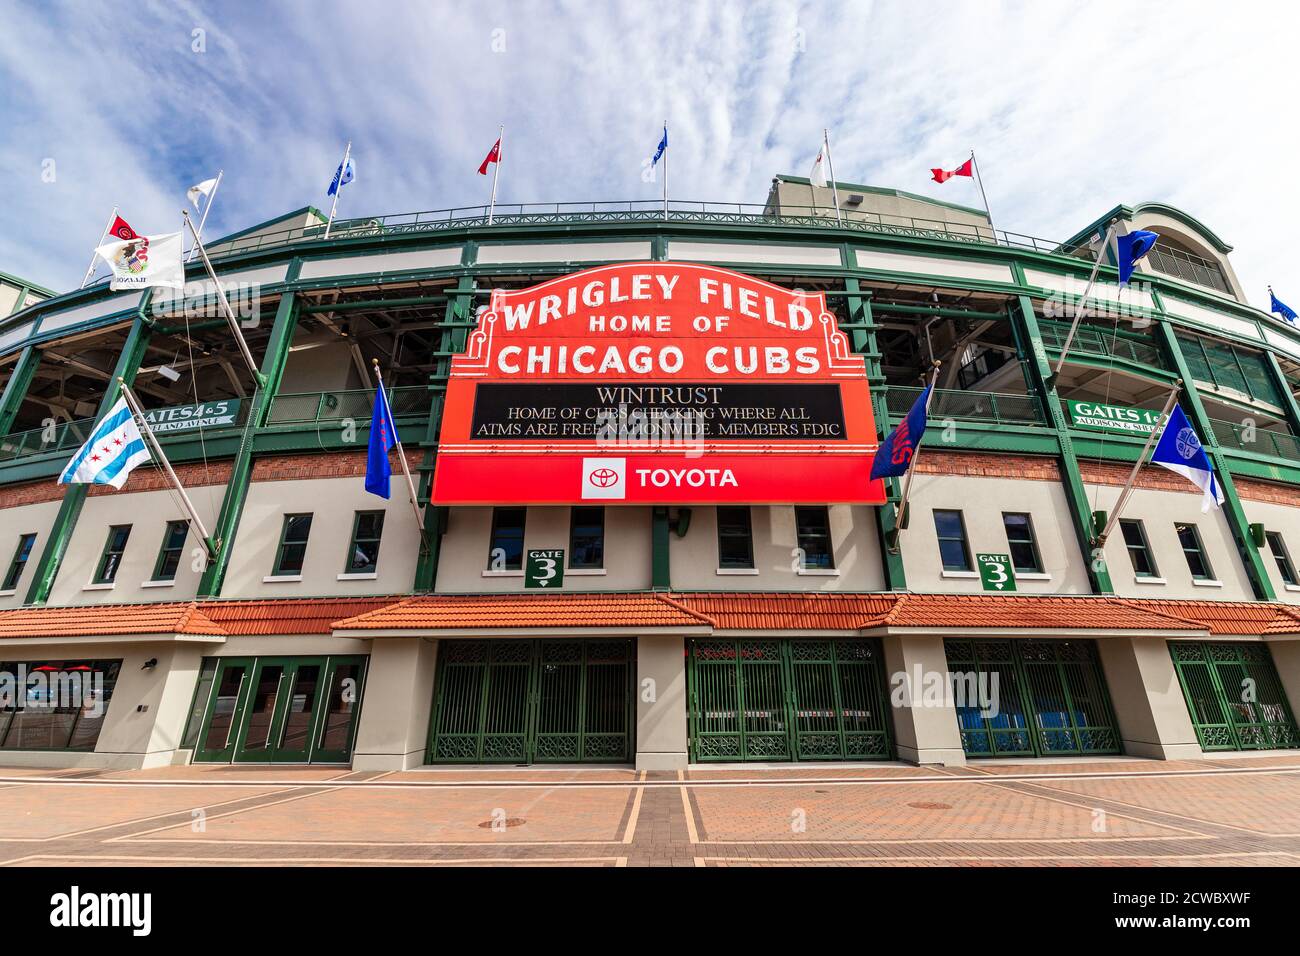 The exterior Major League Baseball's Chicago Cubs' Wrigley Field stadium in the Wrigleyville neighborhood of Chicago. Stock Photo